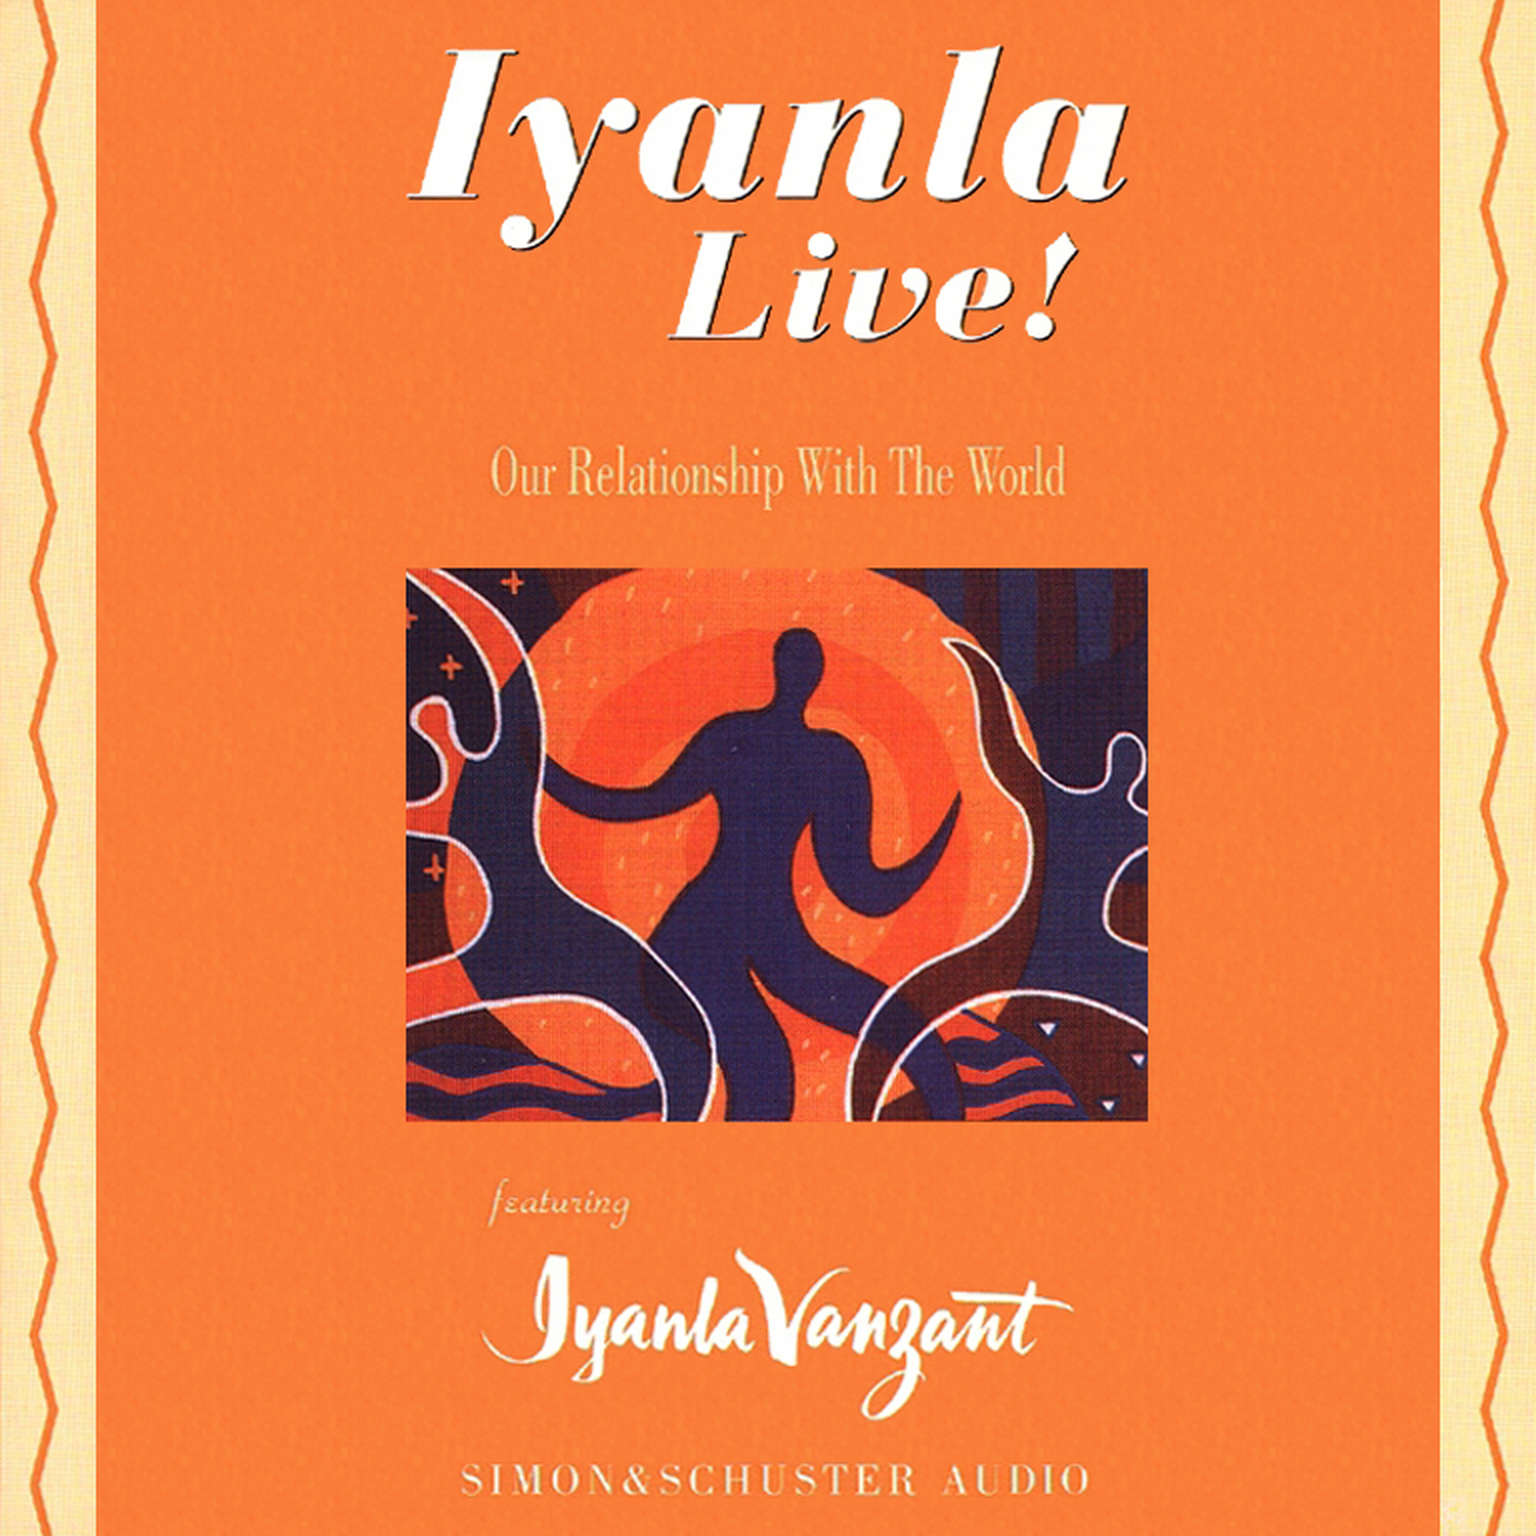 Iyanla Live! Our Relationship with the World (Abridged) Audiobook, by Iyanla Vanzant